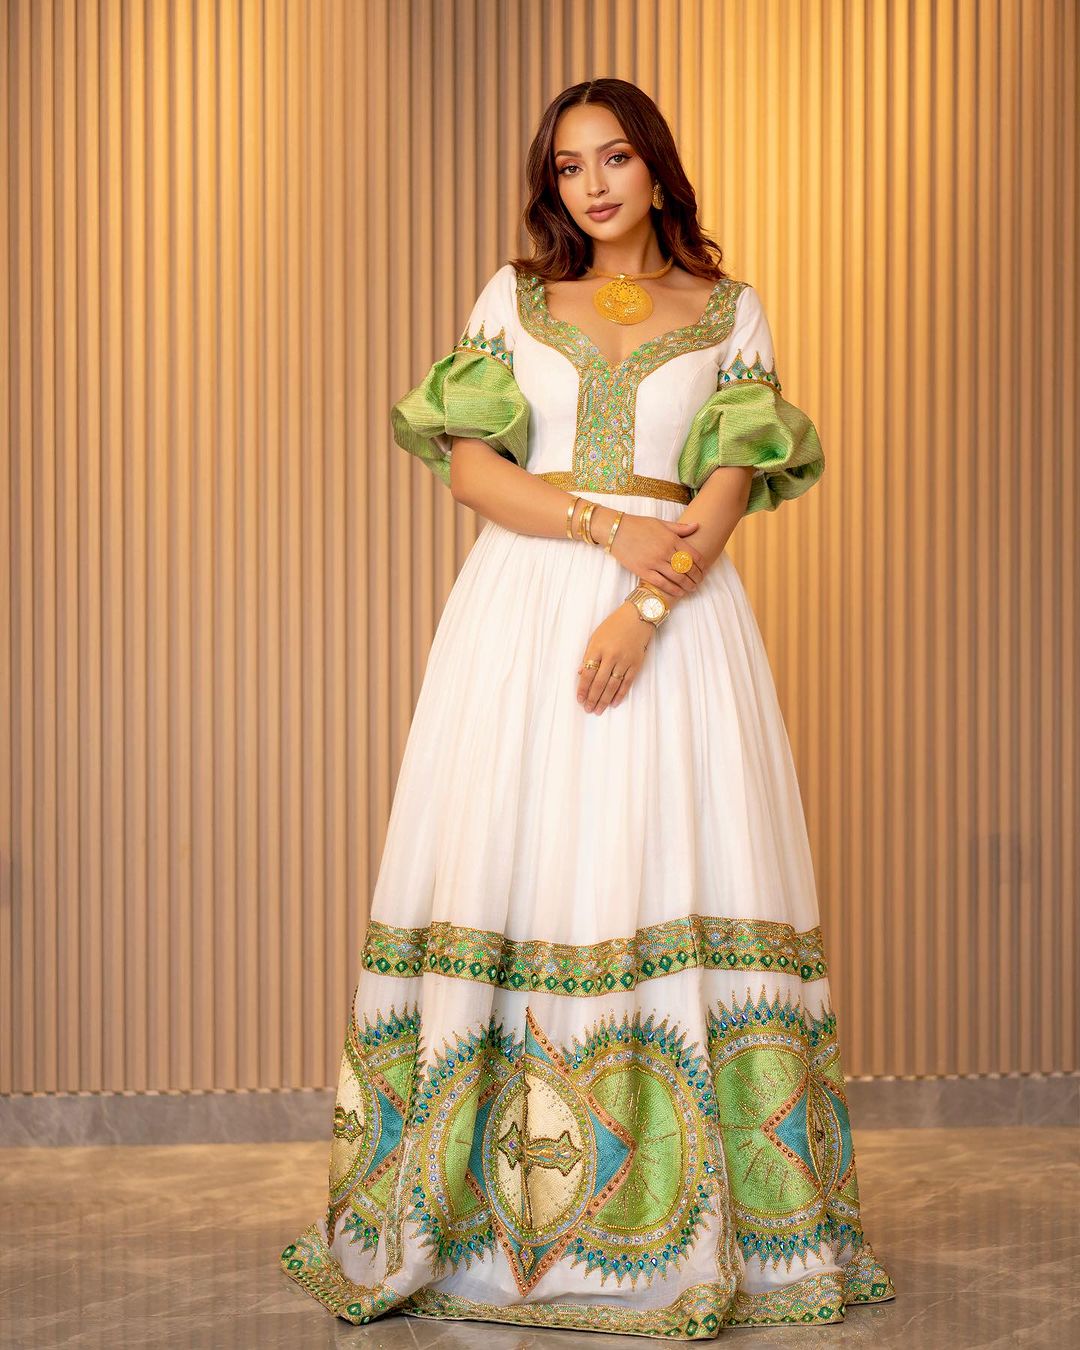 Handwoven full embroidery habesha dress for special occasions kemis in mesmerizing green colors habesha dress Ethiopian dress Eritrean dress